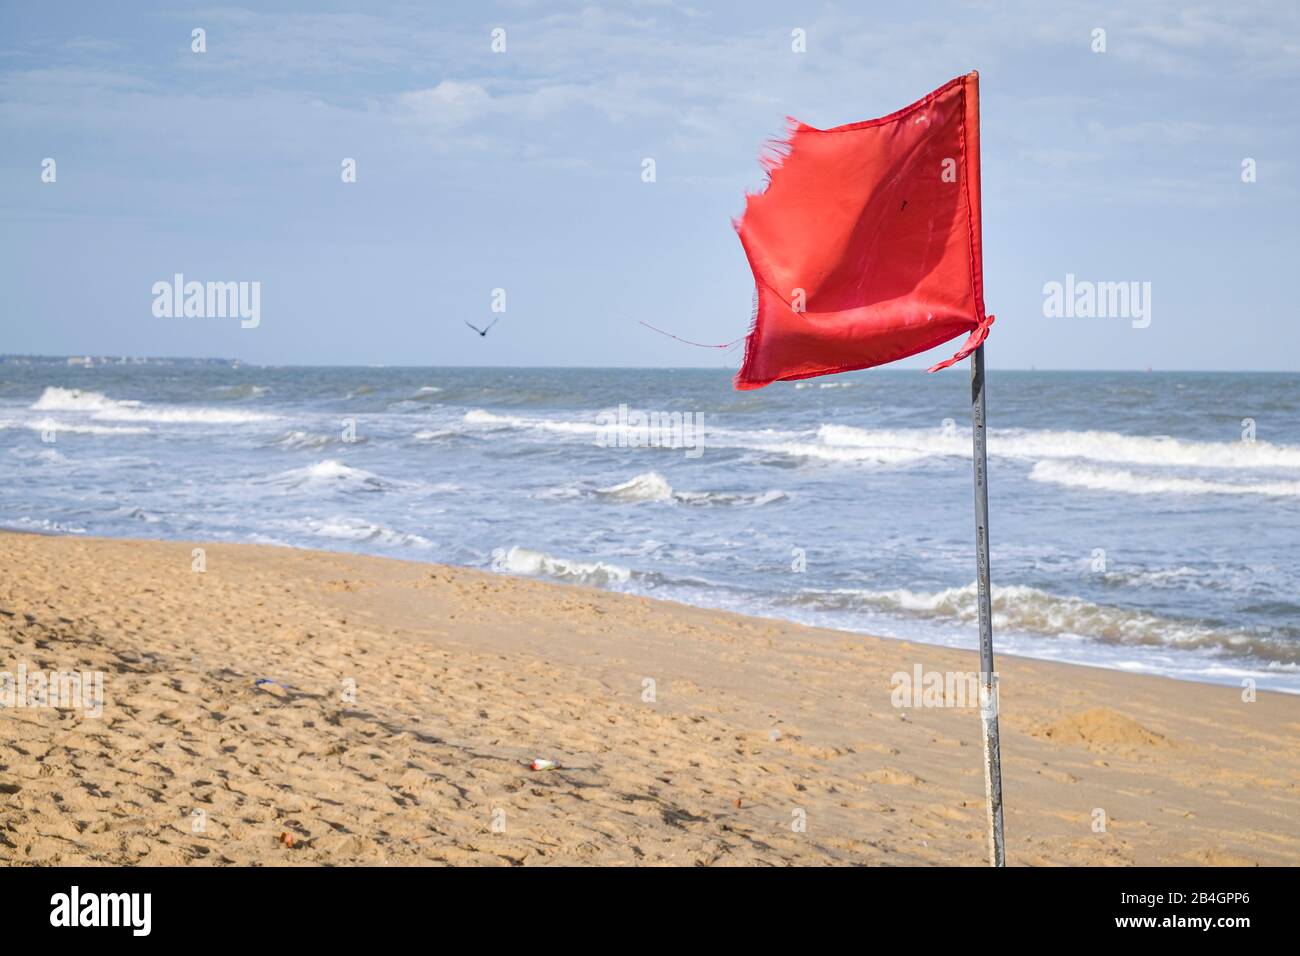 a red flag on the beach blows in the wind Stock Photo